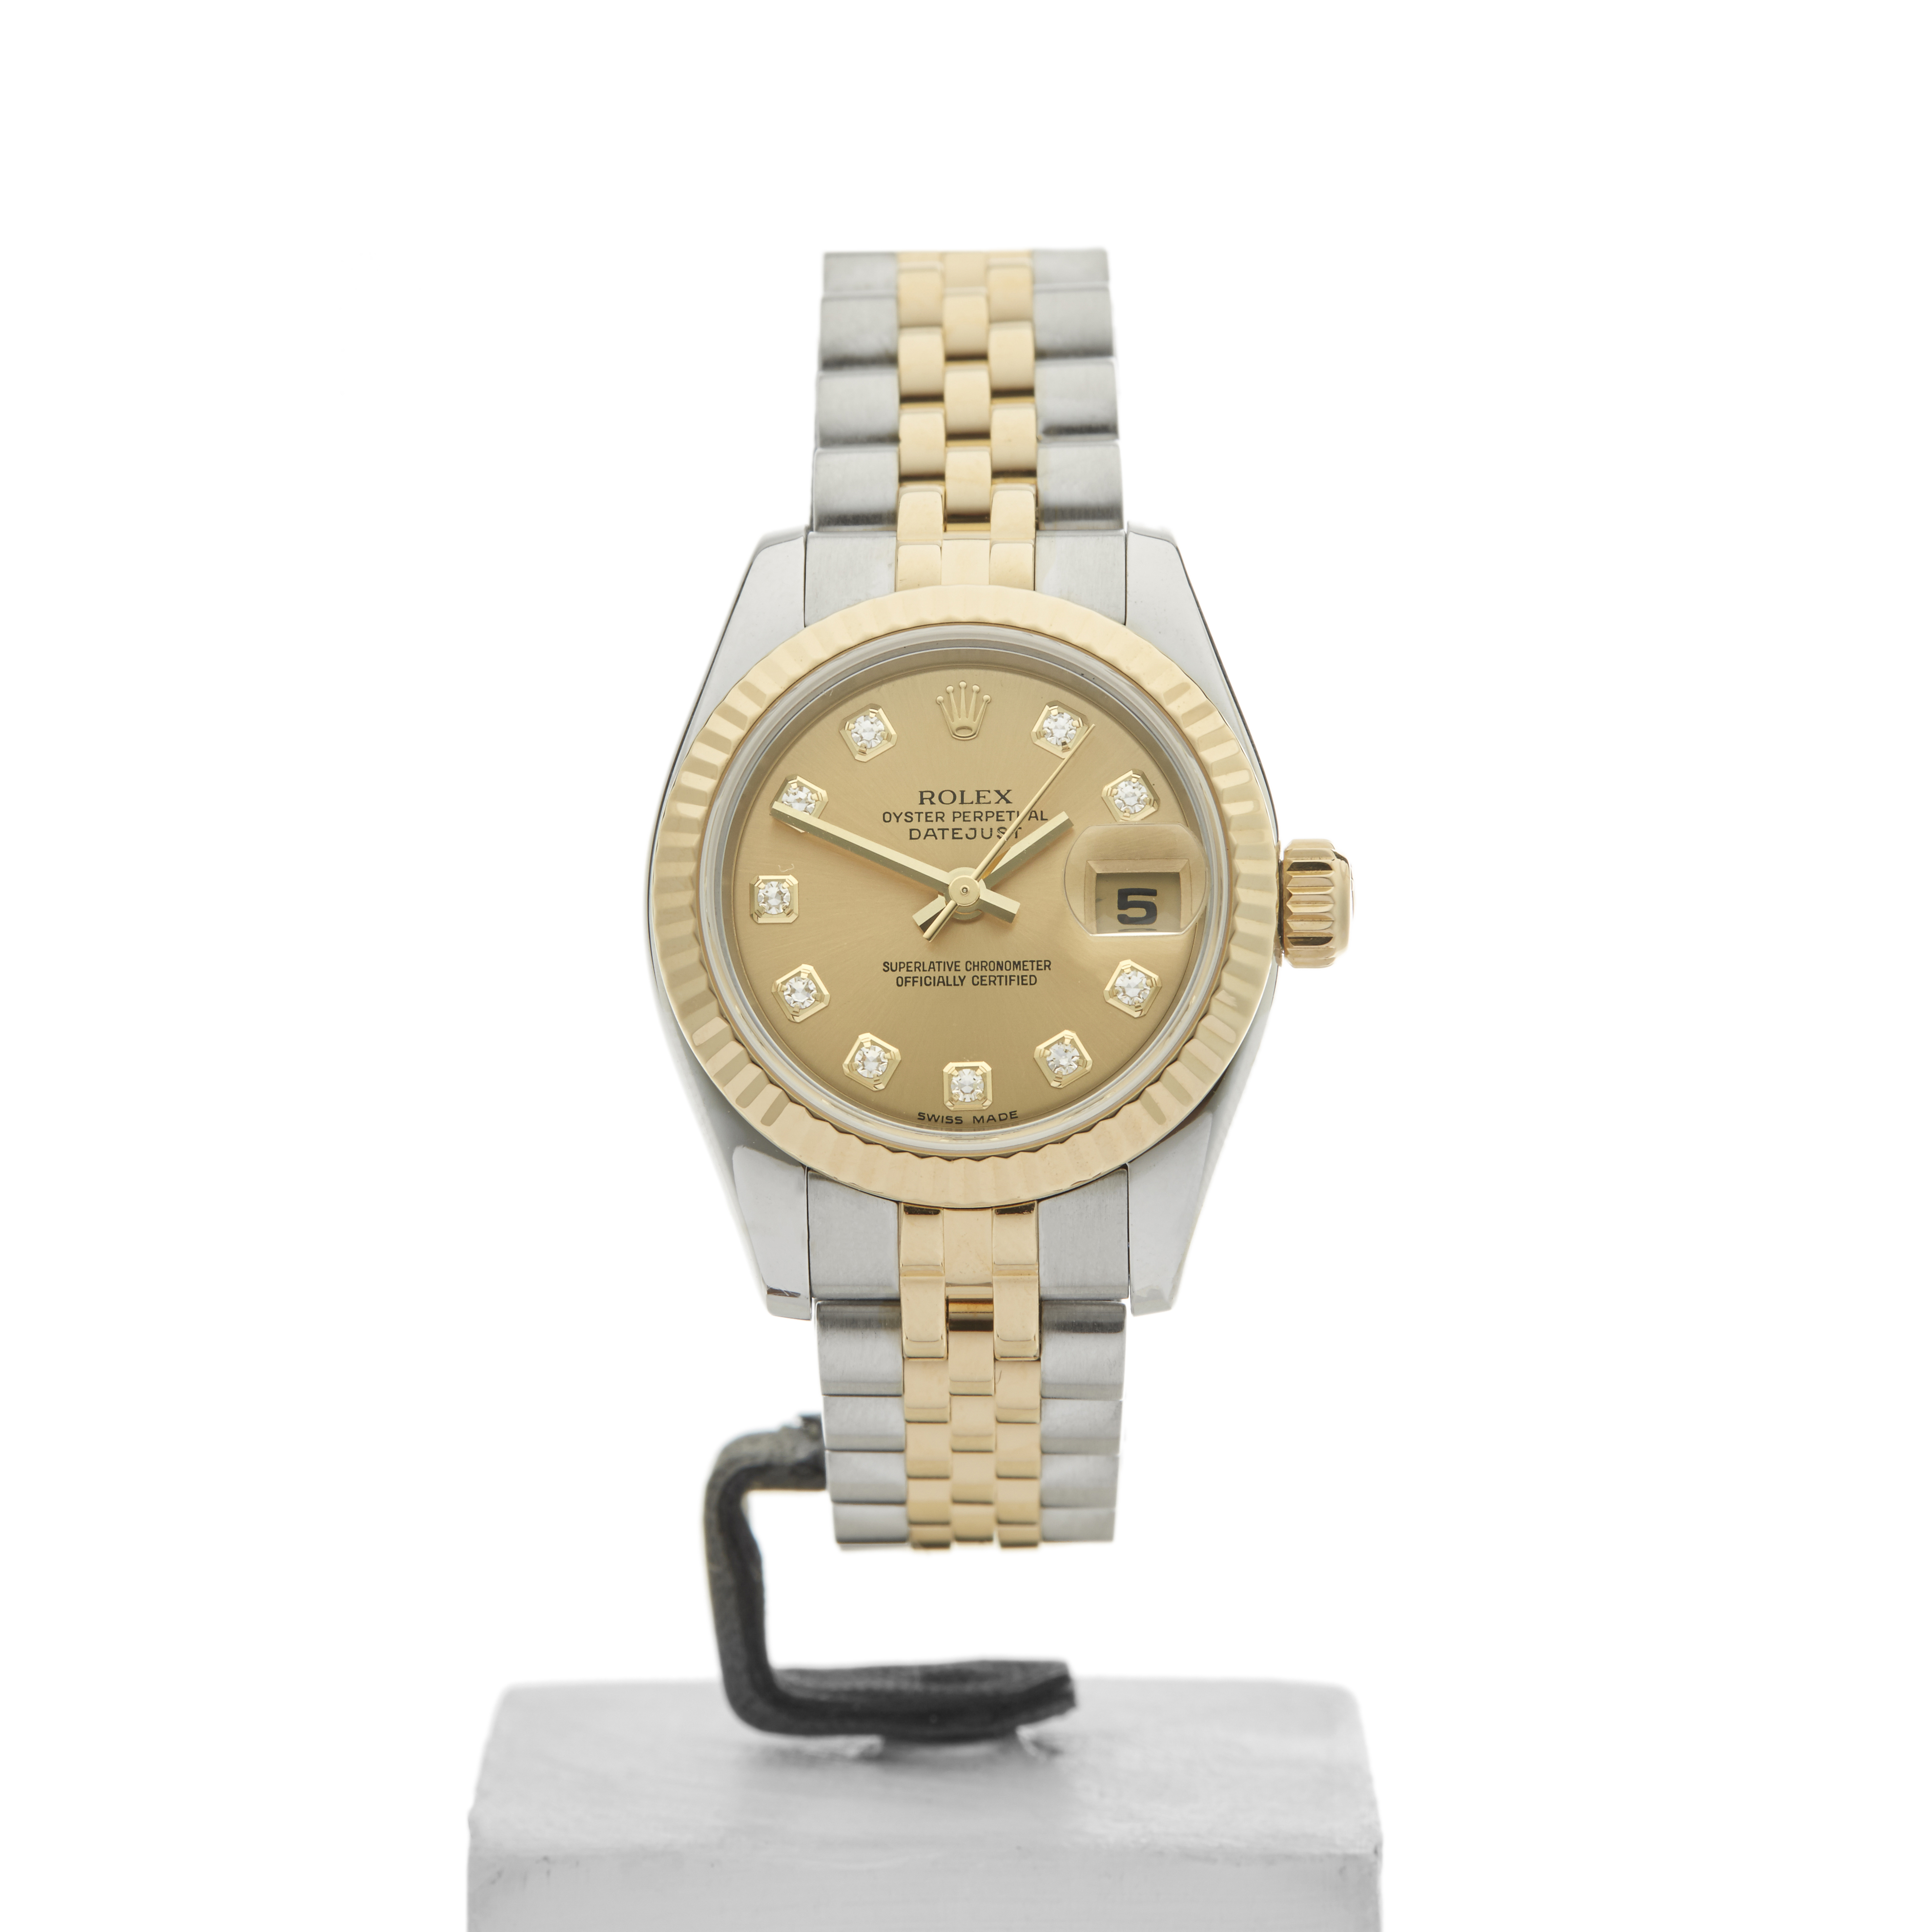 Rolex Datejust 26mm Stainless Steel & 18k Yellow Gold 179173 - Image 9 of 16